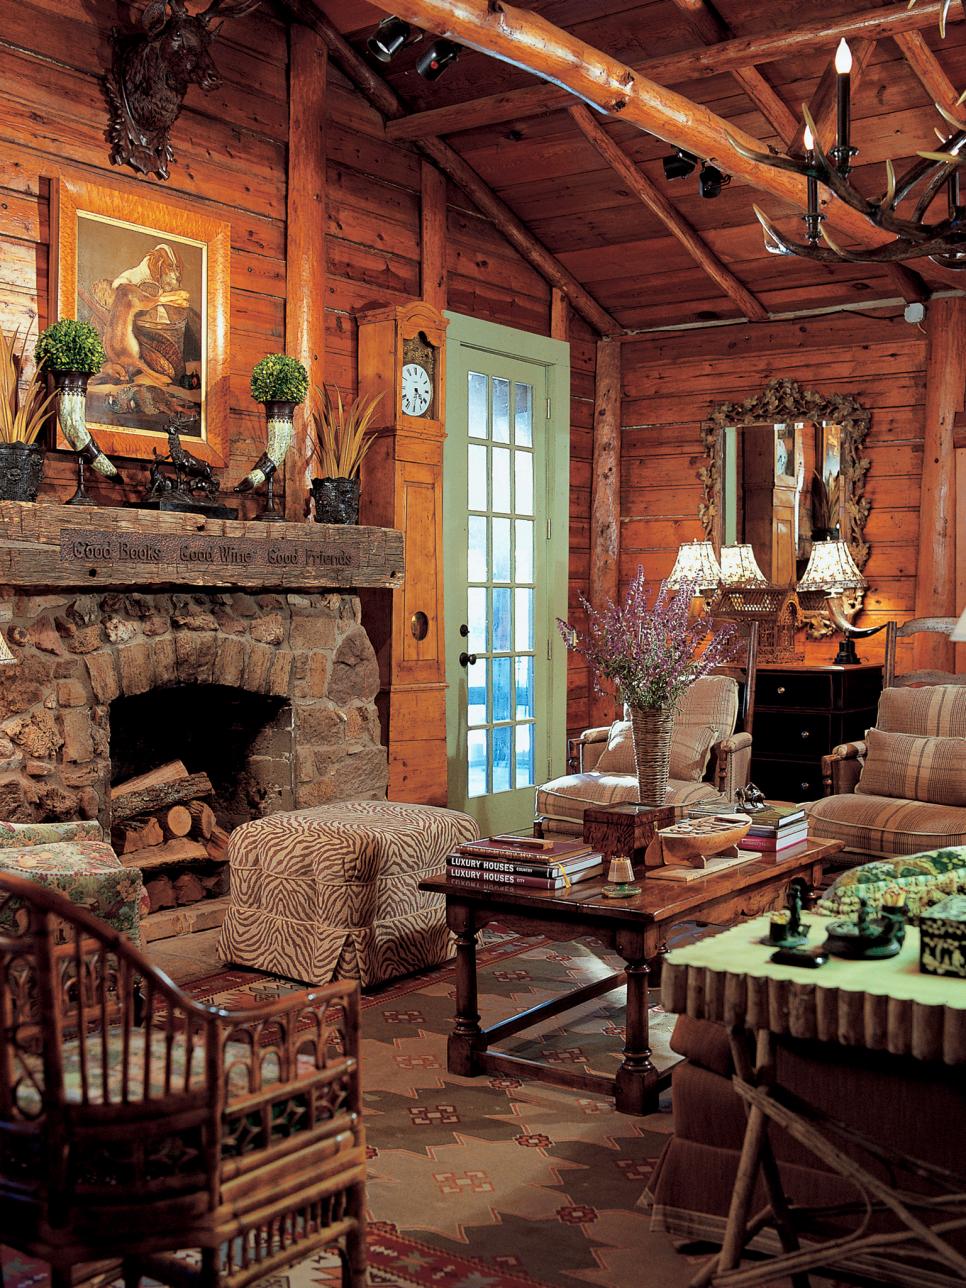 fireplace cabin stone hgtv rustic living country faudree craftsman charles rooms log interiors mantel cabins french furniture cottage decor fireplaces